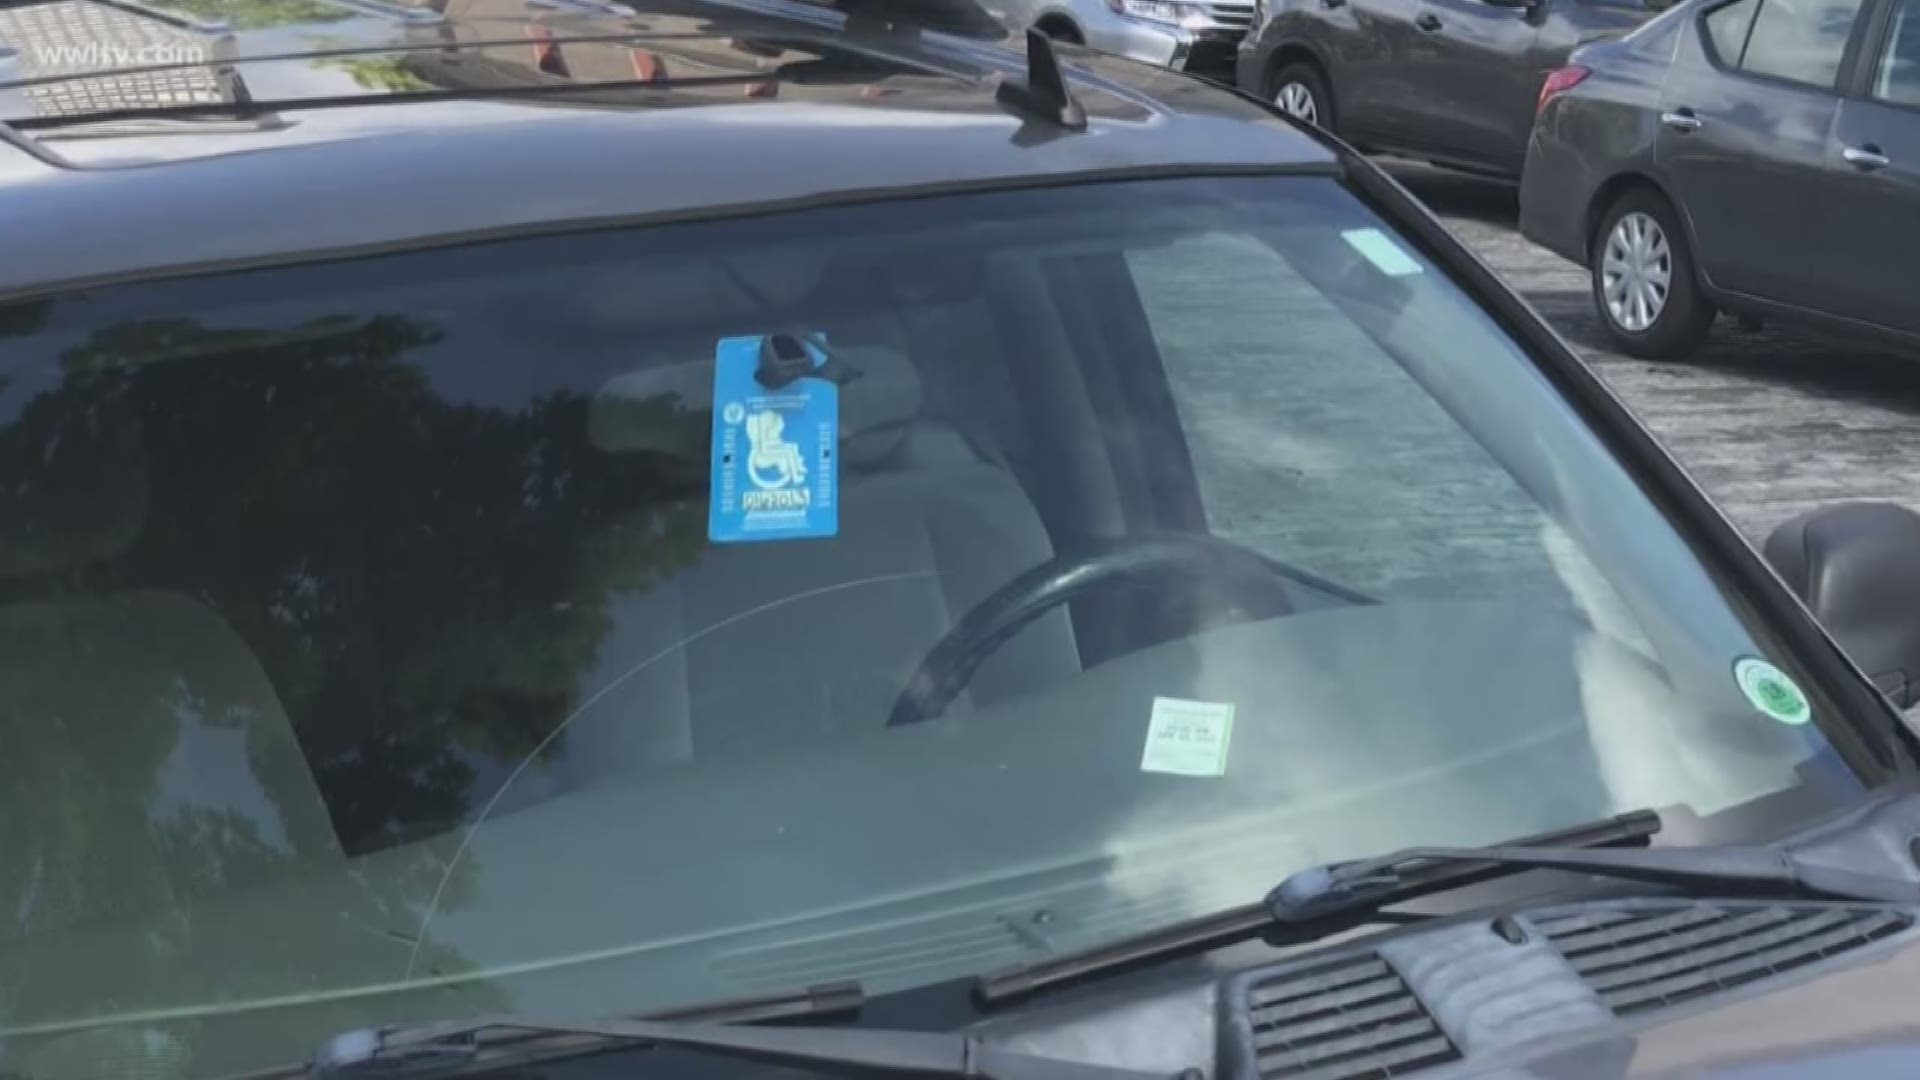 This March in New Orleans, the Inspector General's Office released their annual report showing 26 employees used unauthorized handicapped placards to park for free in metered spots around the  Sewerage and Water Board headquarters.